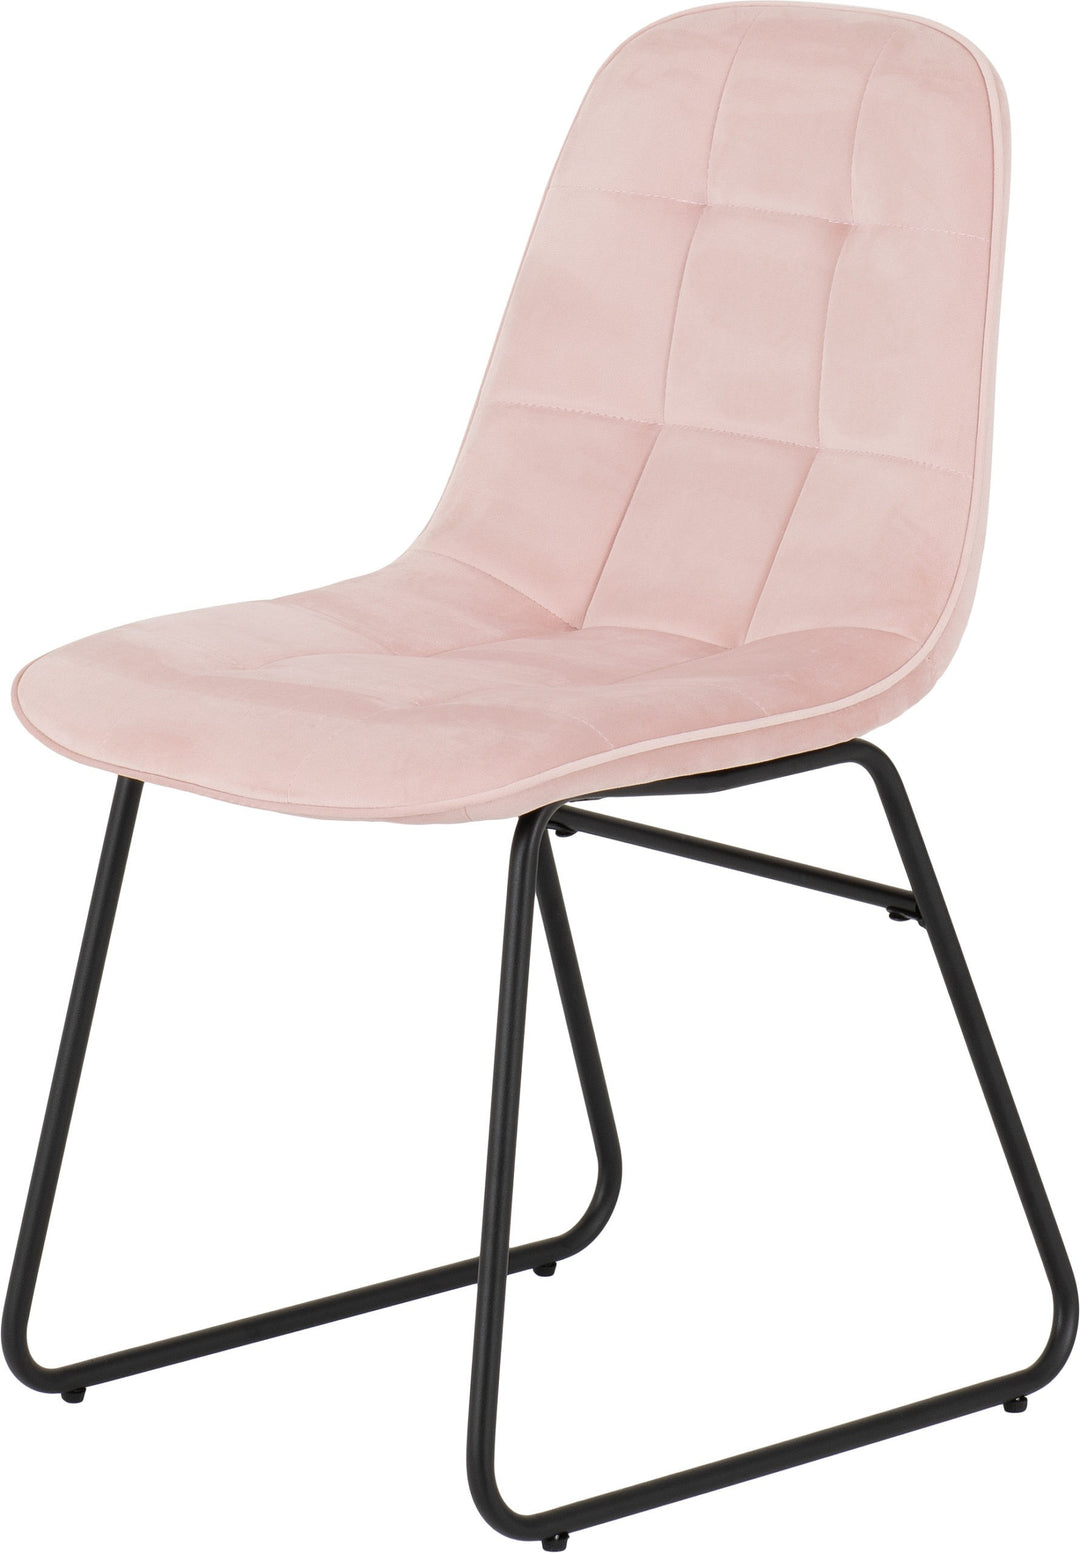 Avery & Lukas Extending Dining Set (X4 Chairs) - Concrete/Baby Pink Velvet